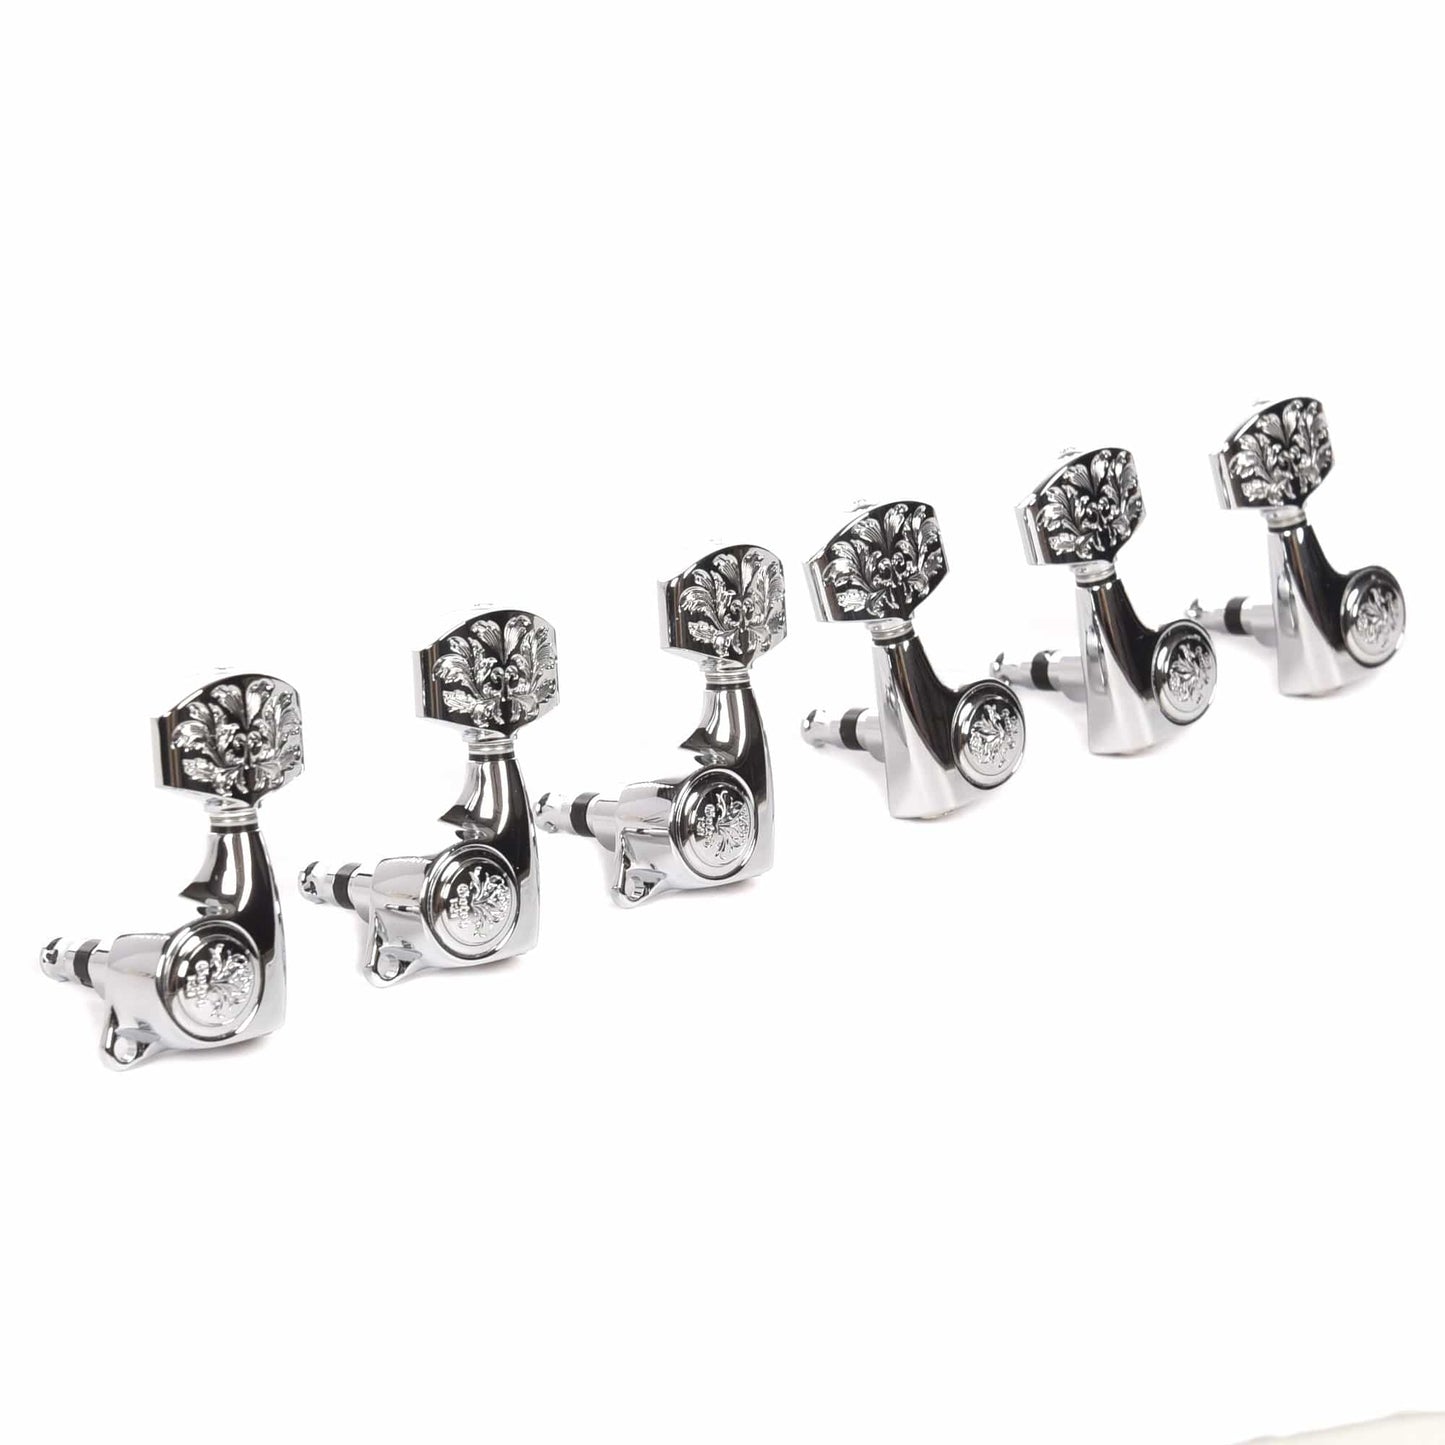 Taylor Gotoh Luxury Tuners 1:21 6-String Chrome Accessories / Tuners